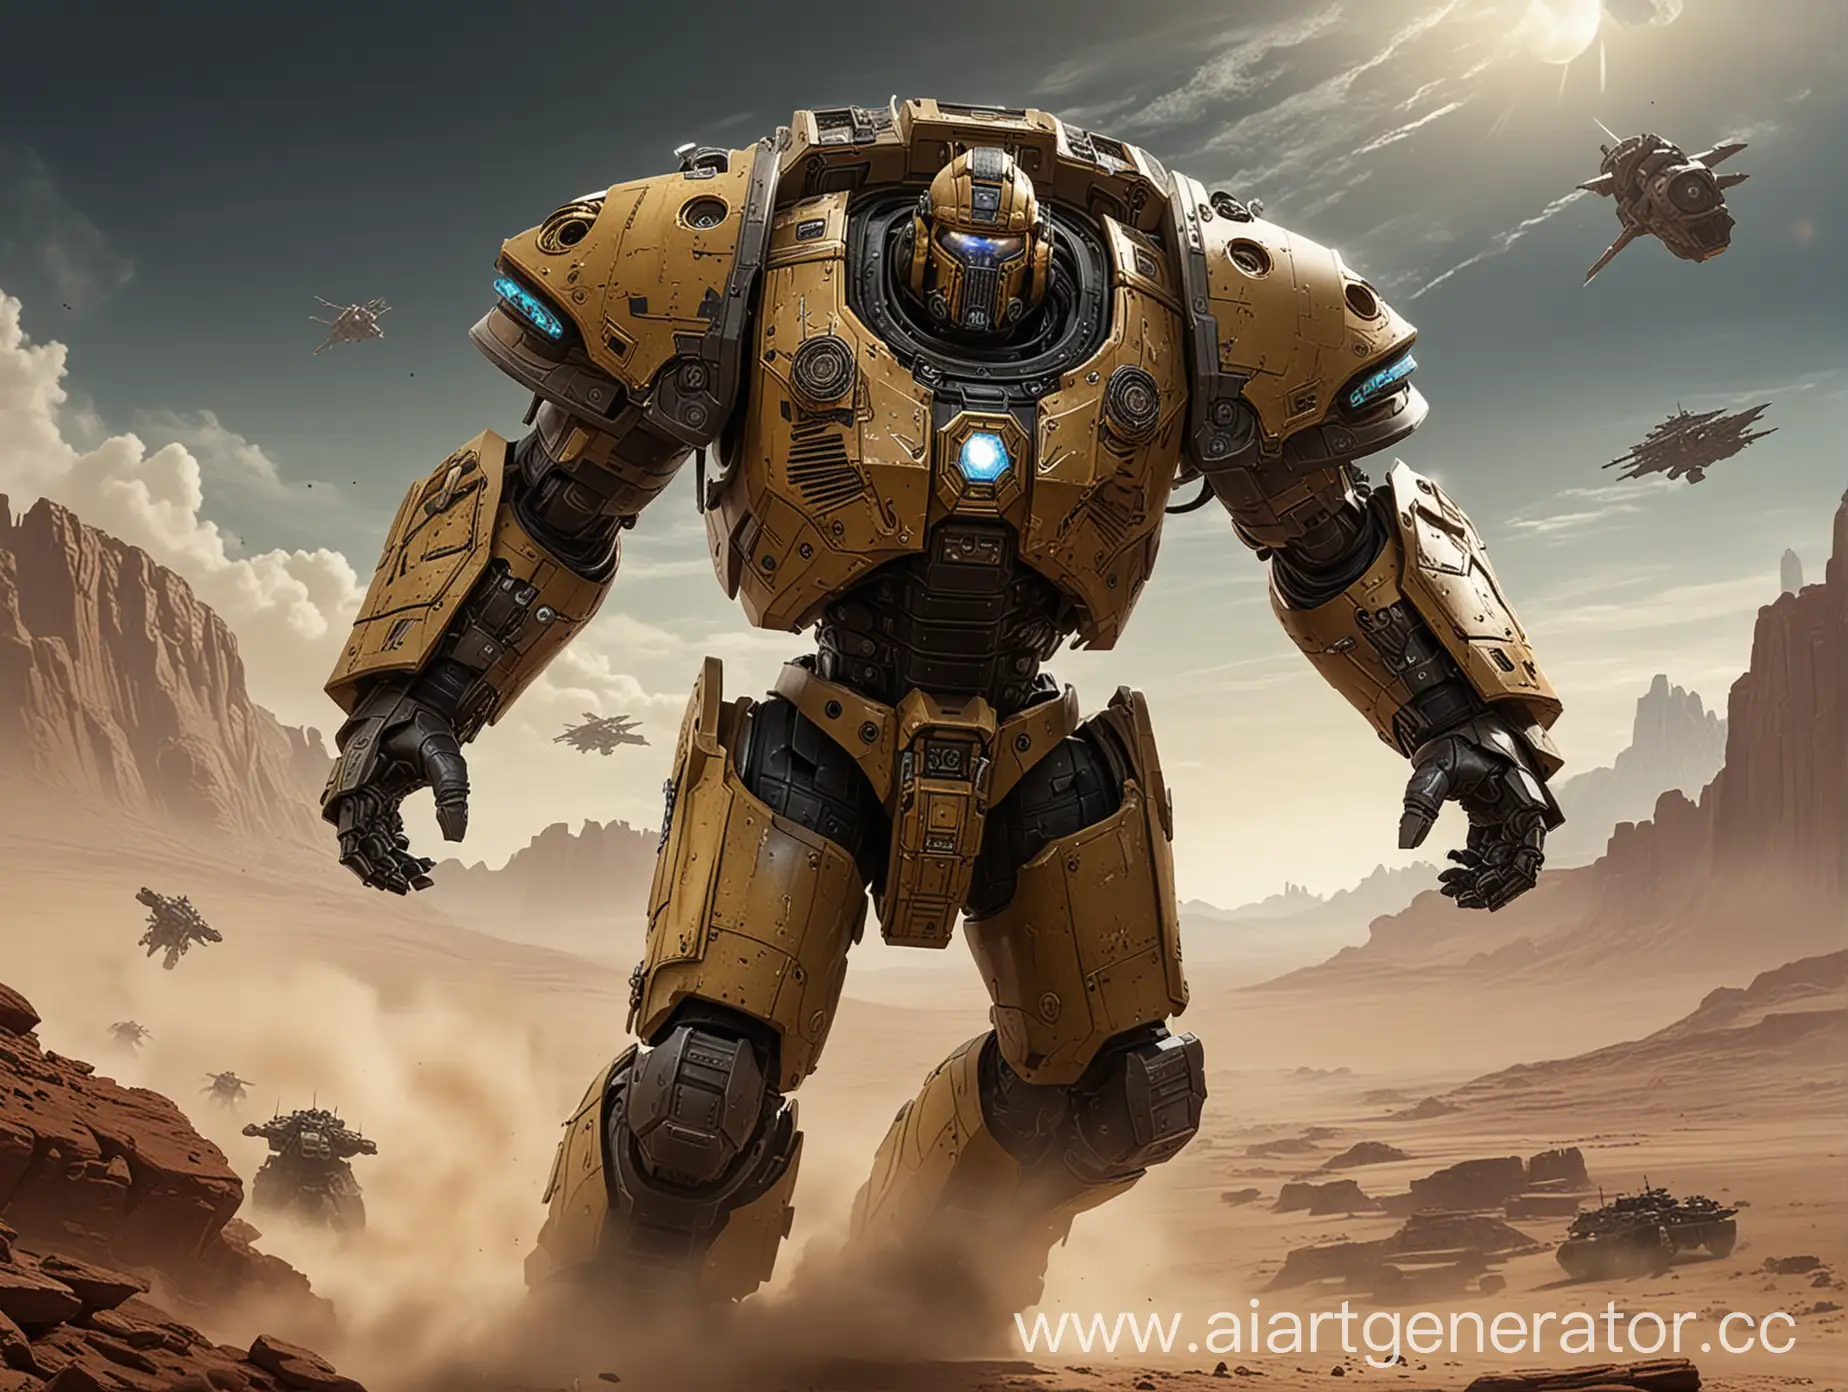 The Emperor-class Titan strides across the planet. Warhammer 40000